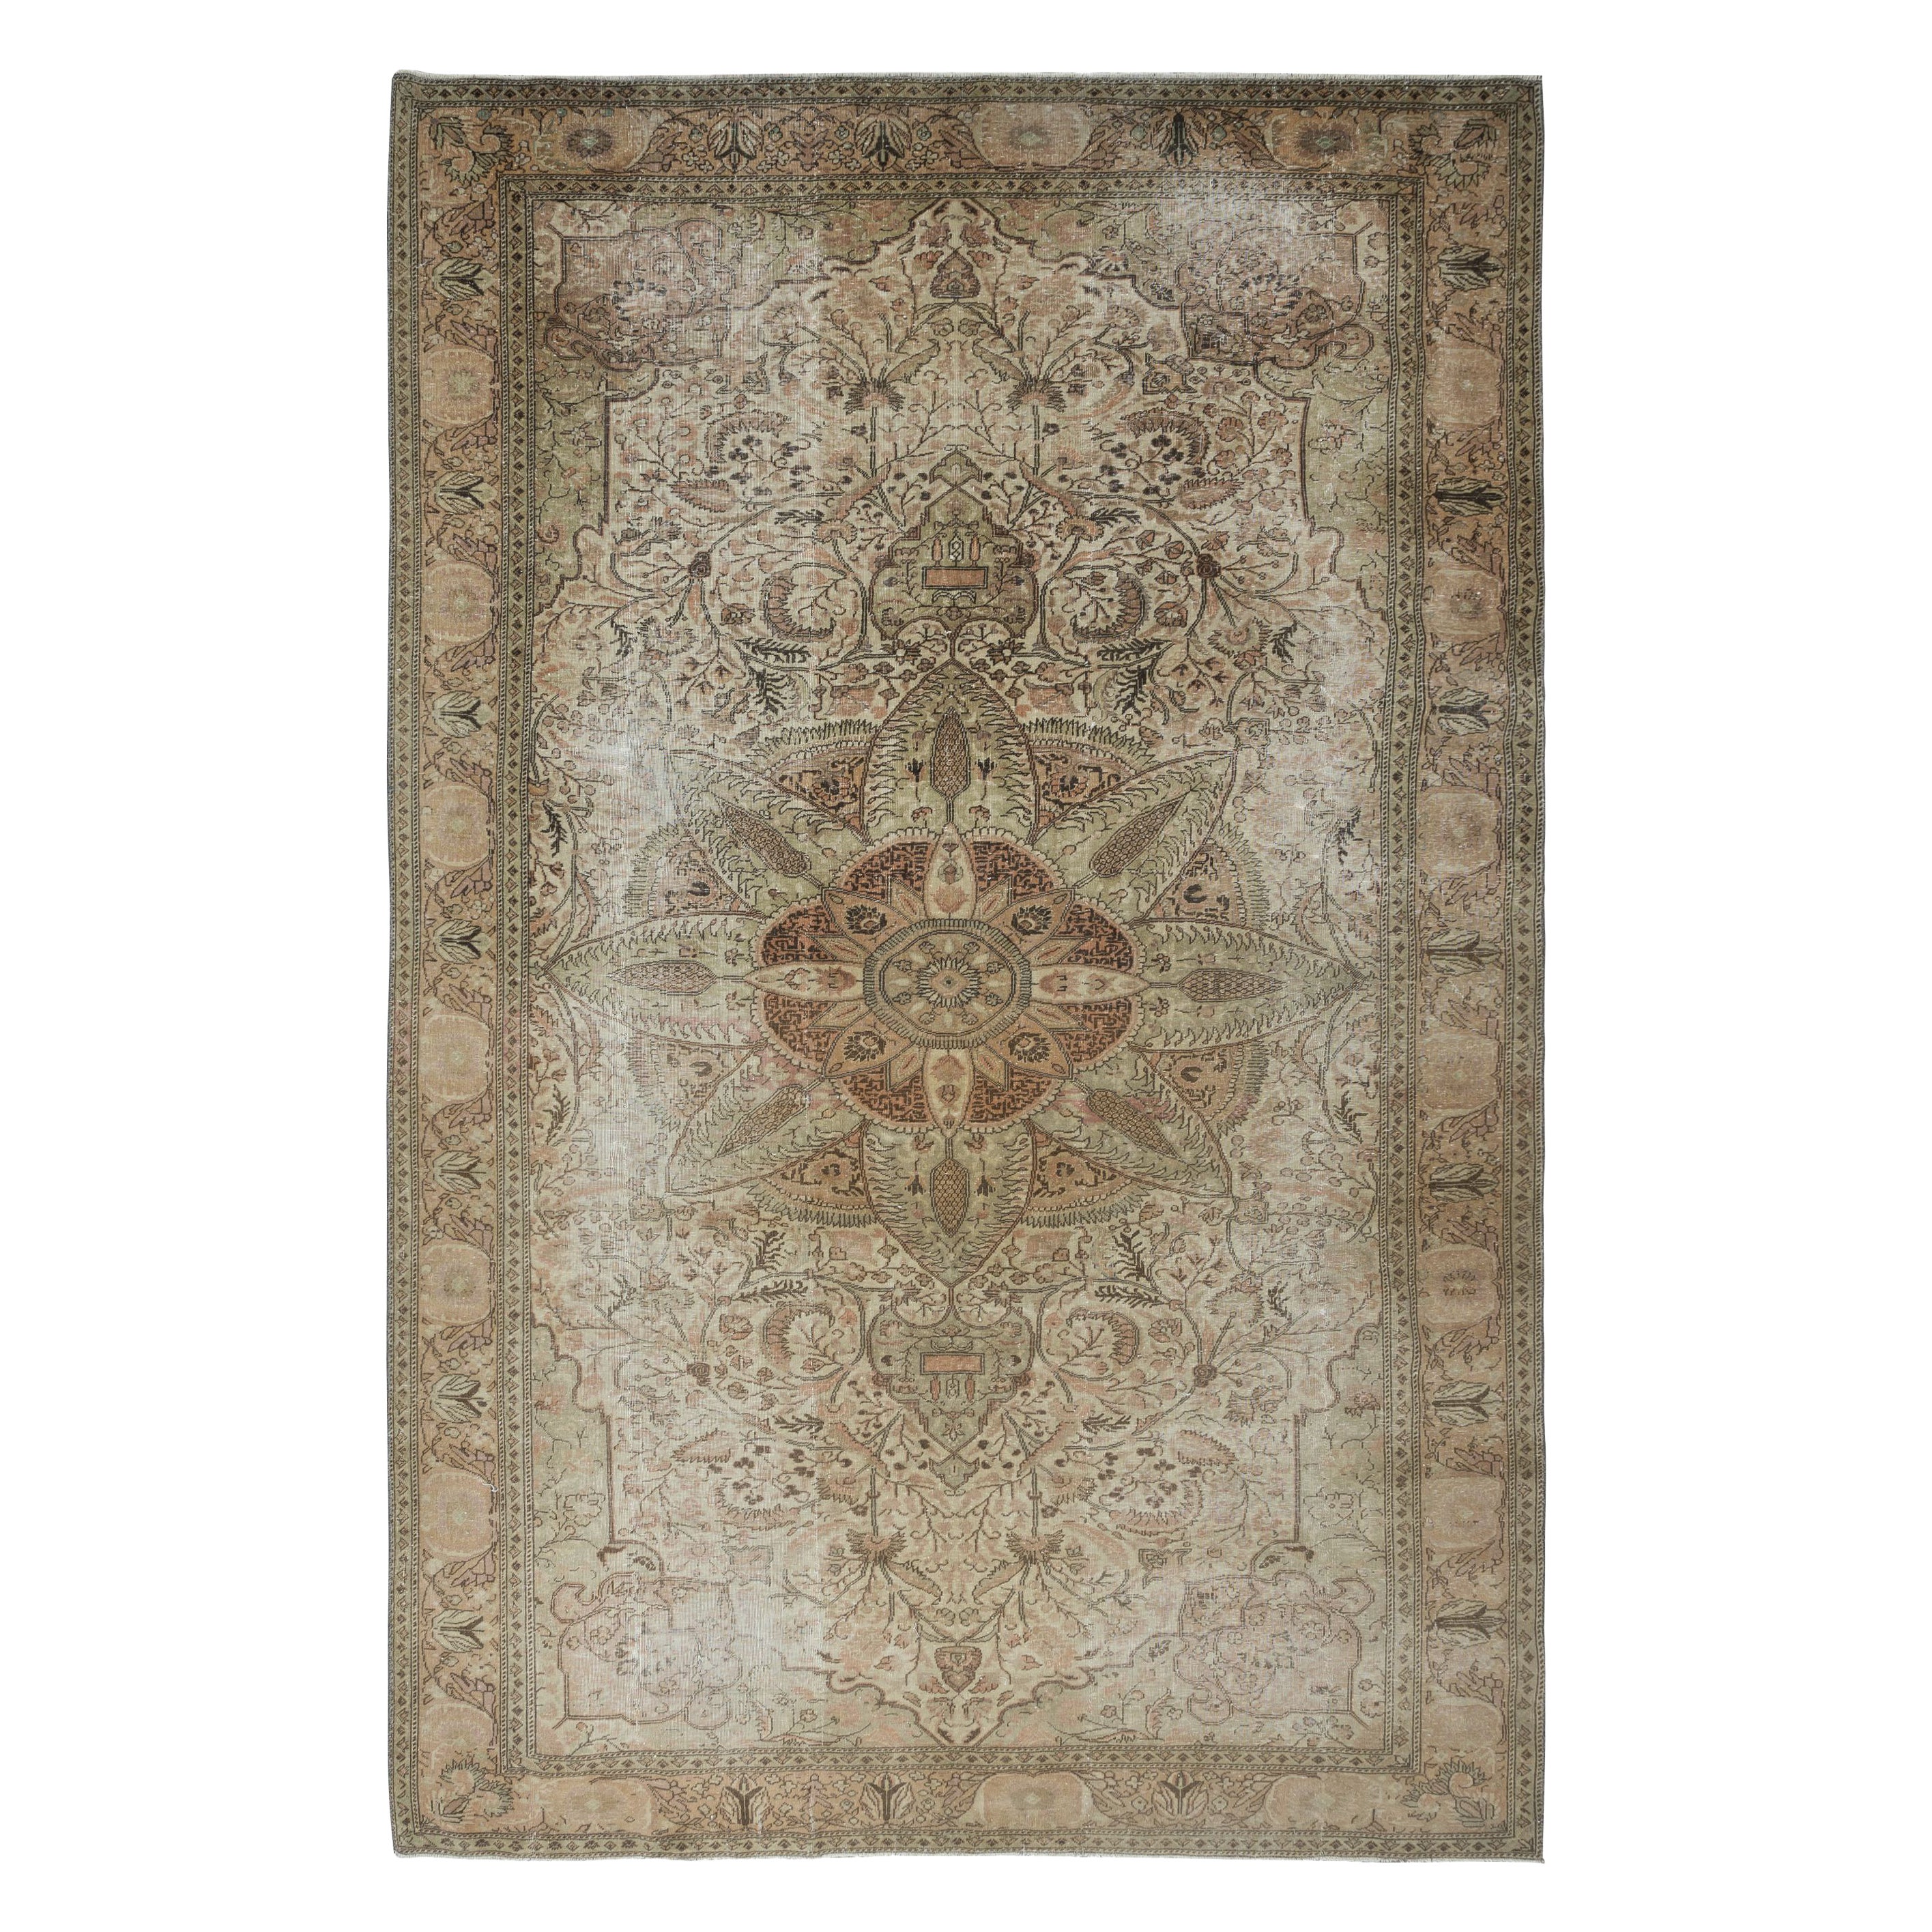 7.5x11.6 Ft One of a Kind Vintage Wool Area Rug, Hand Knotted Anatolian Carpet For Sale